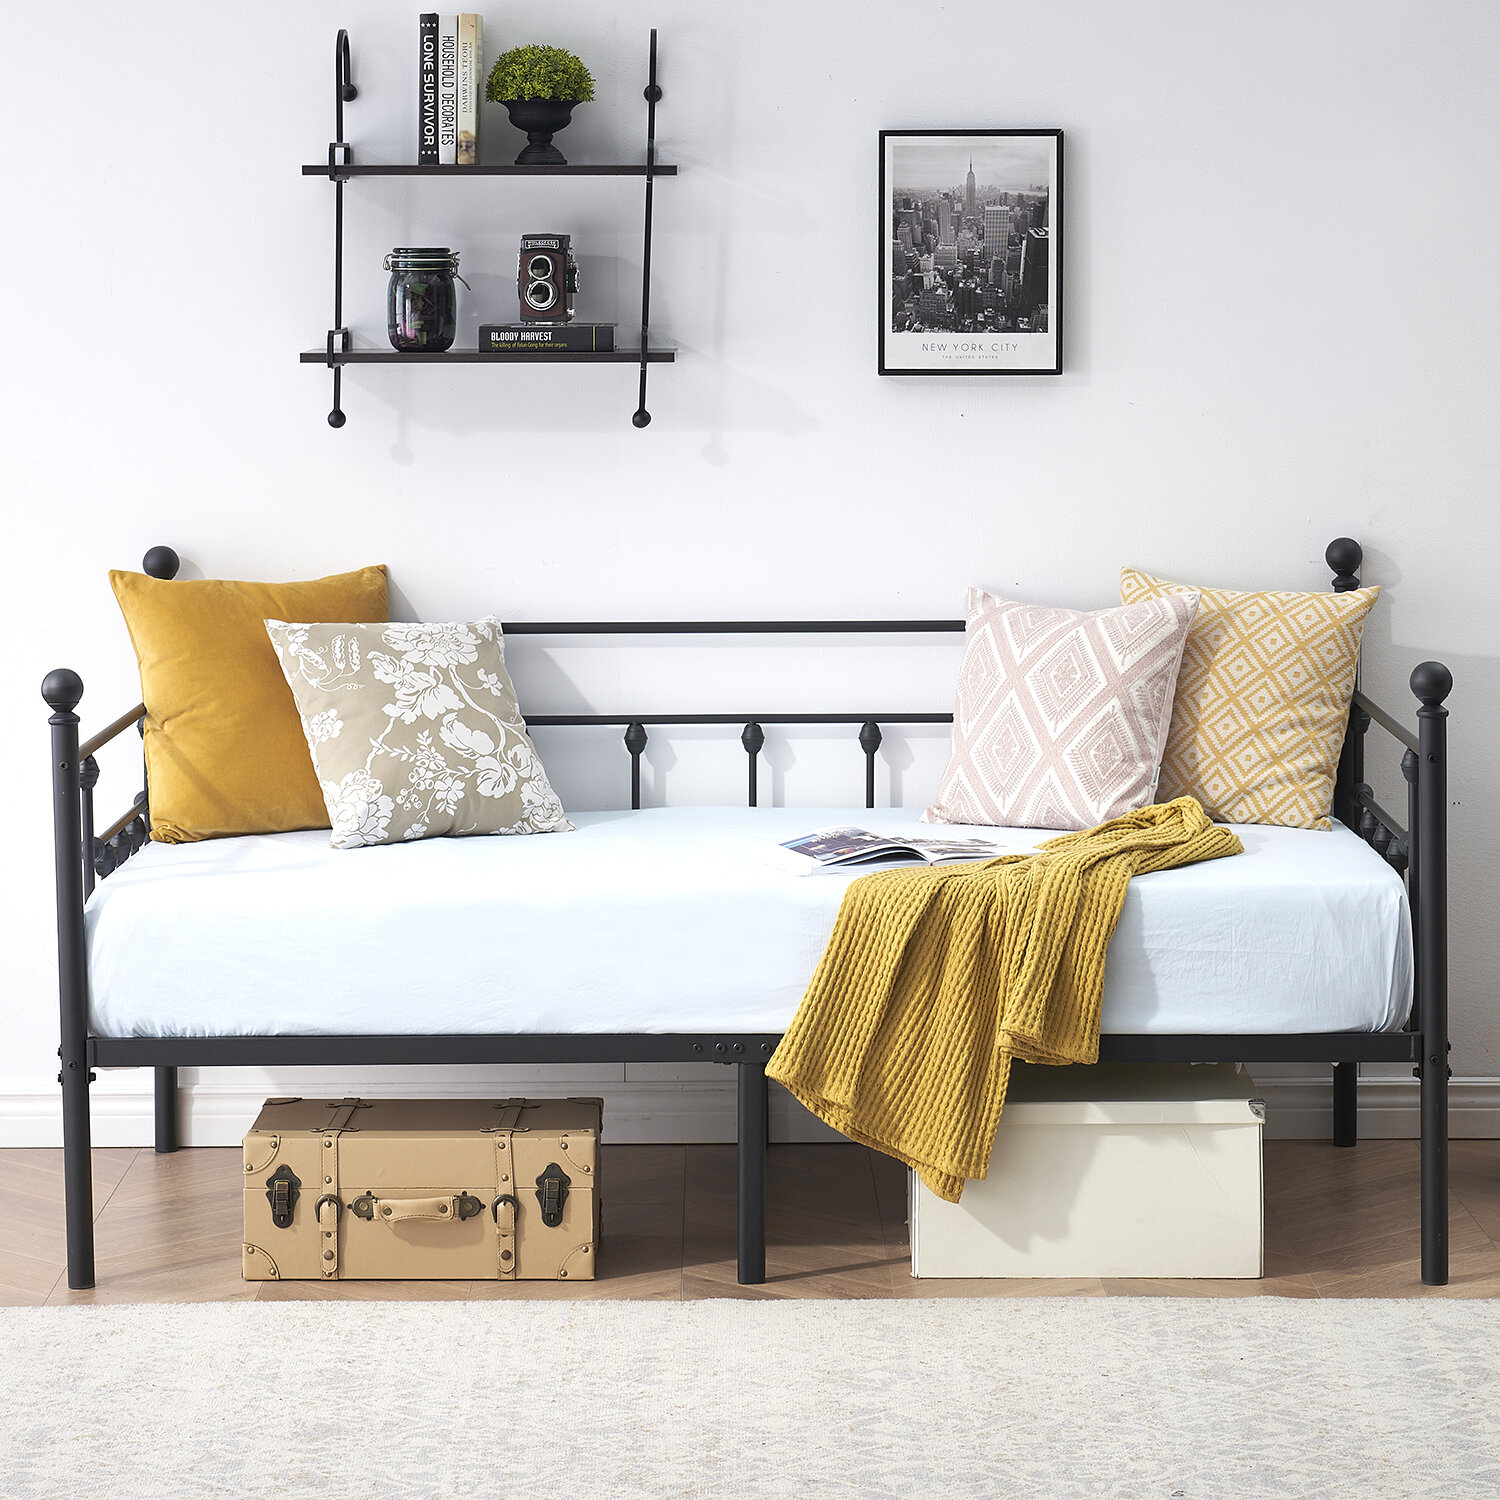 Beige, Metal Slats 190 CM Mattress Aingoo Metal Daybed Bed Frame Single Size Day Bed Steel Slat with Headboard Fits for 90 